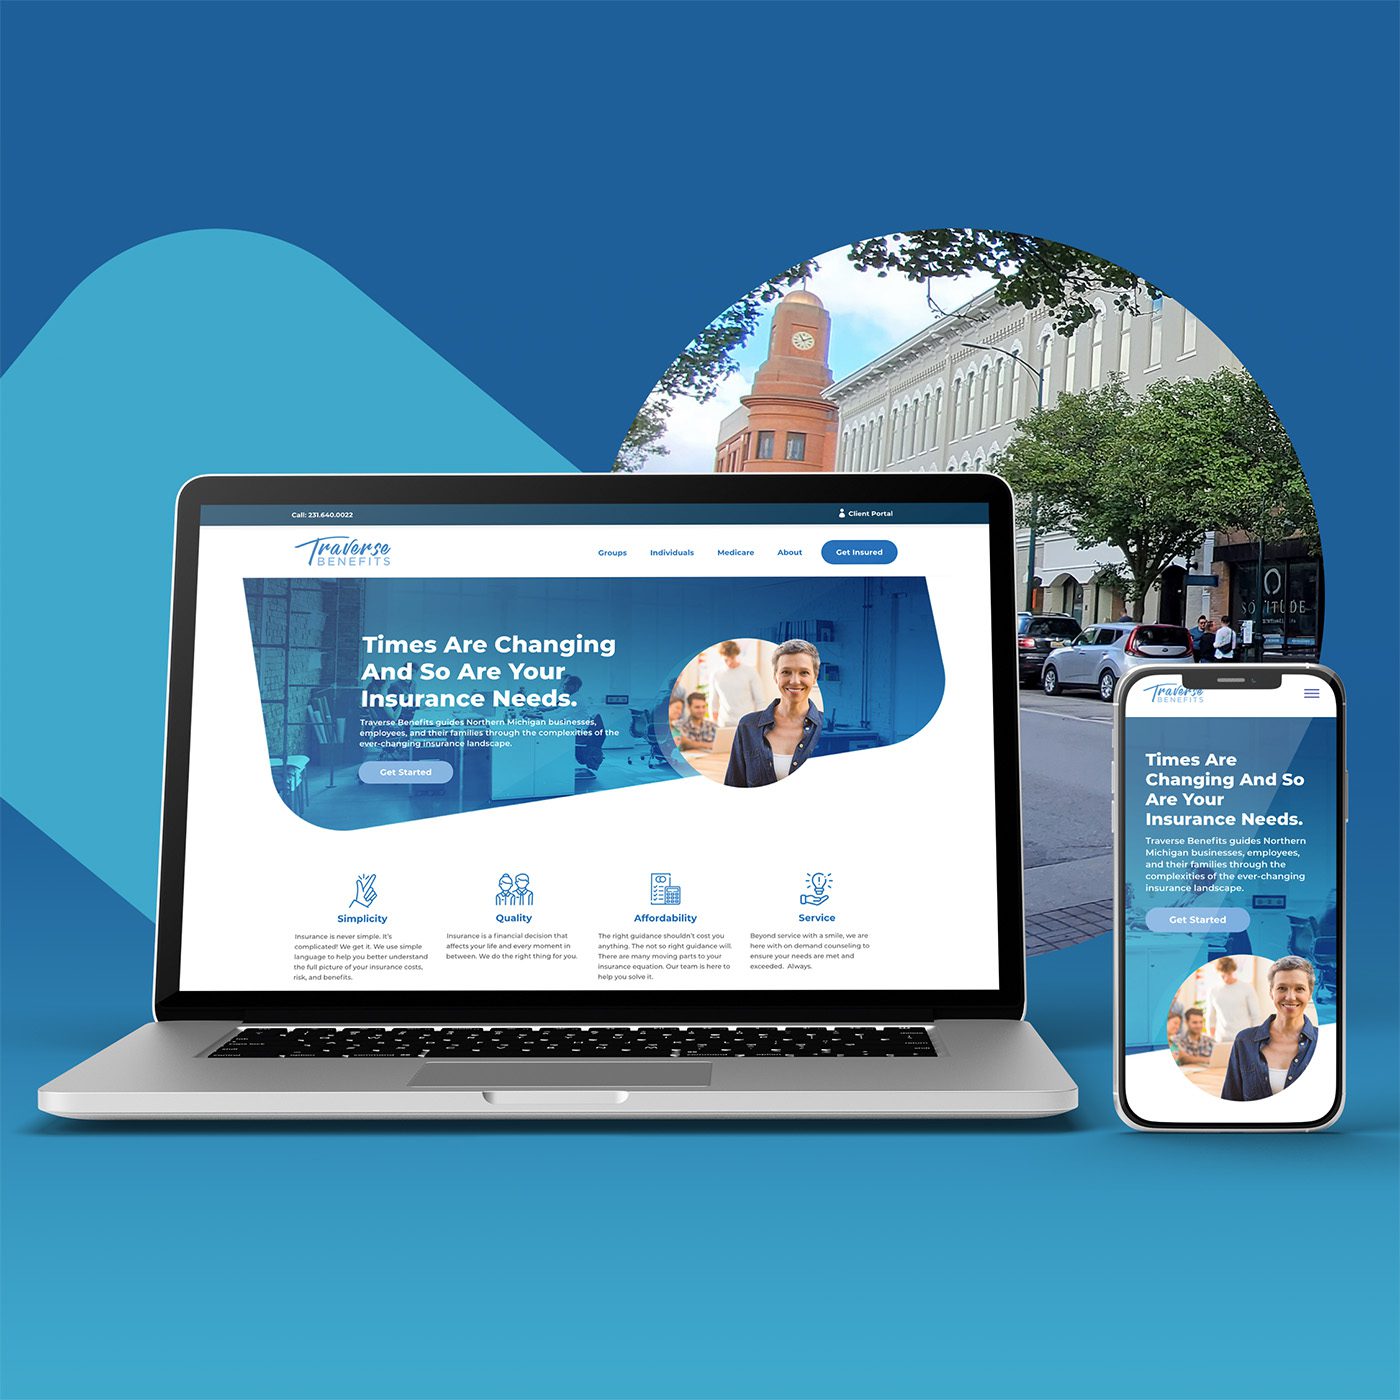 Website design for Traverse City based insurance company